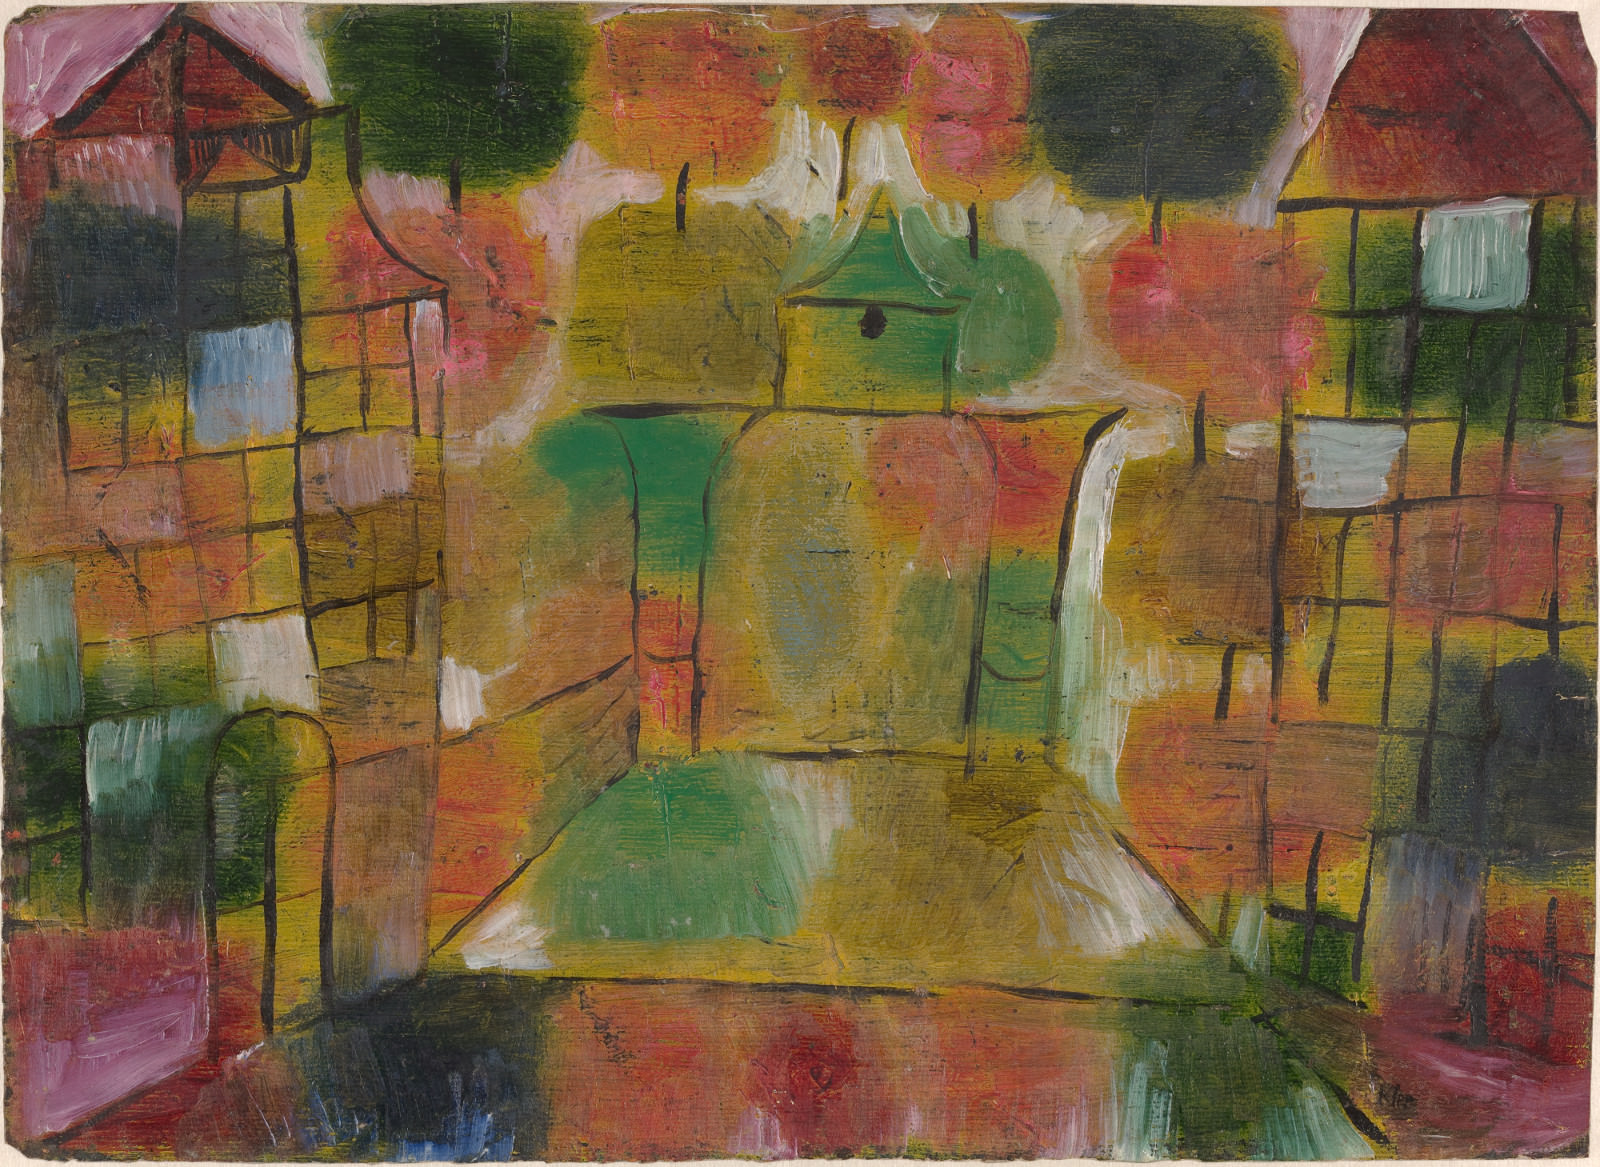 Fig. 10 – Paul Klee, Tree and Architecture - Rhythms, 1920, Oil on paper, overall: 27.9 x 38.3 cm (11 x 15 1/16 in.). National Gallery of Art, Washington. Gift of Benjamin and Lillian Hertzberg.